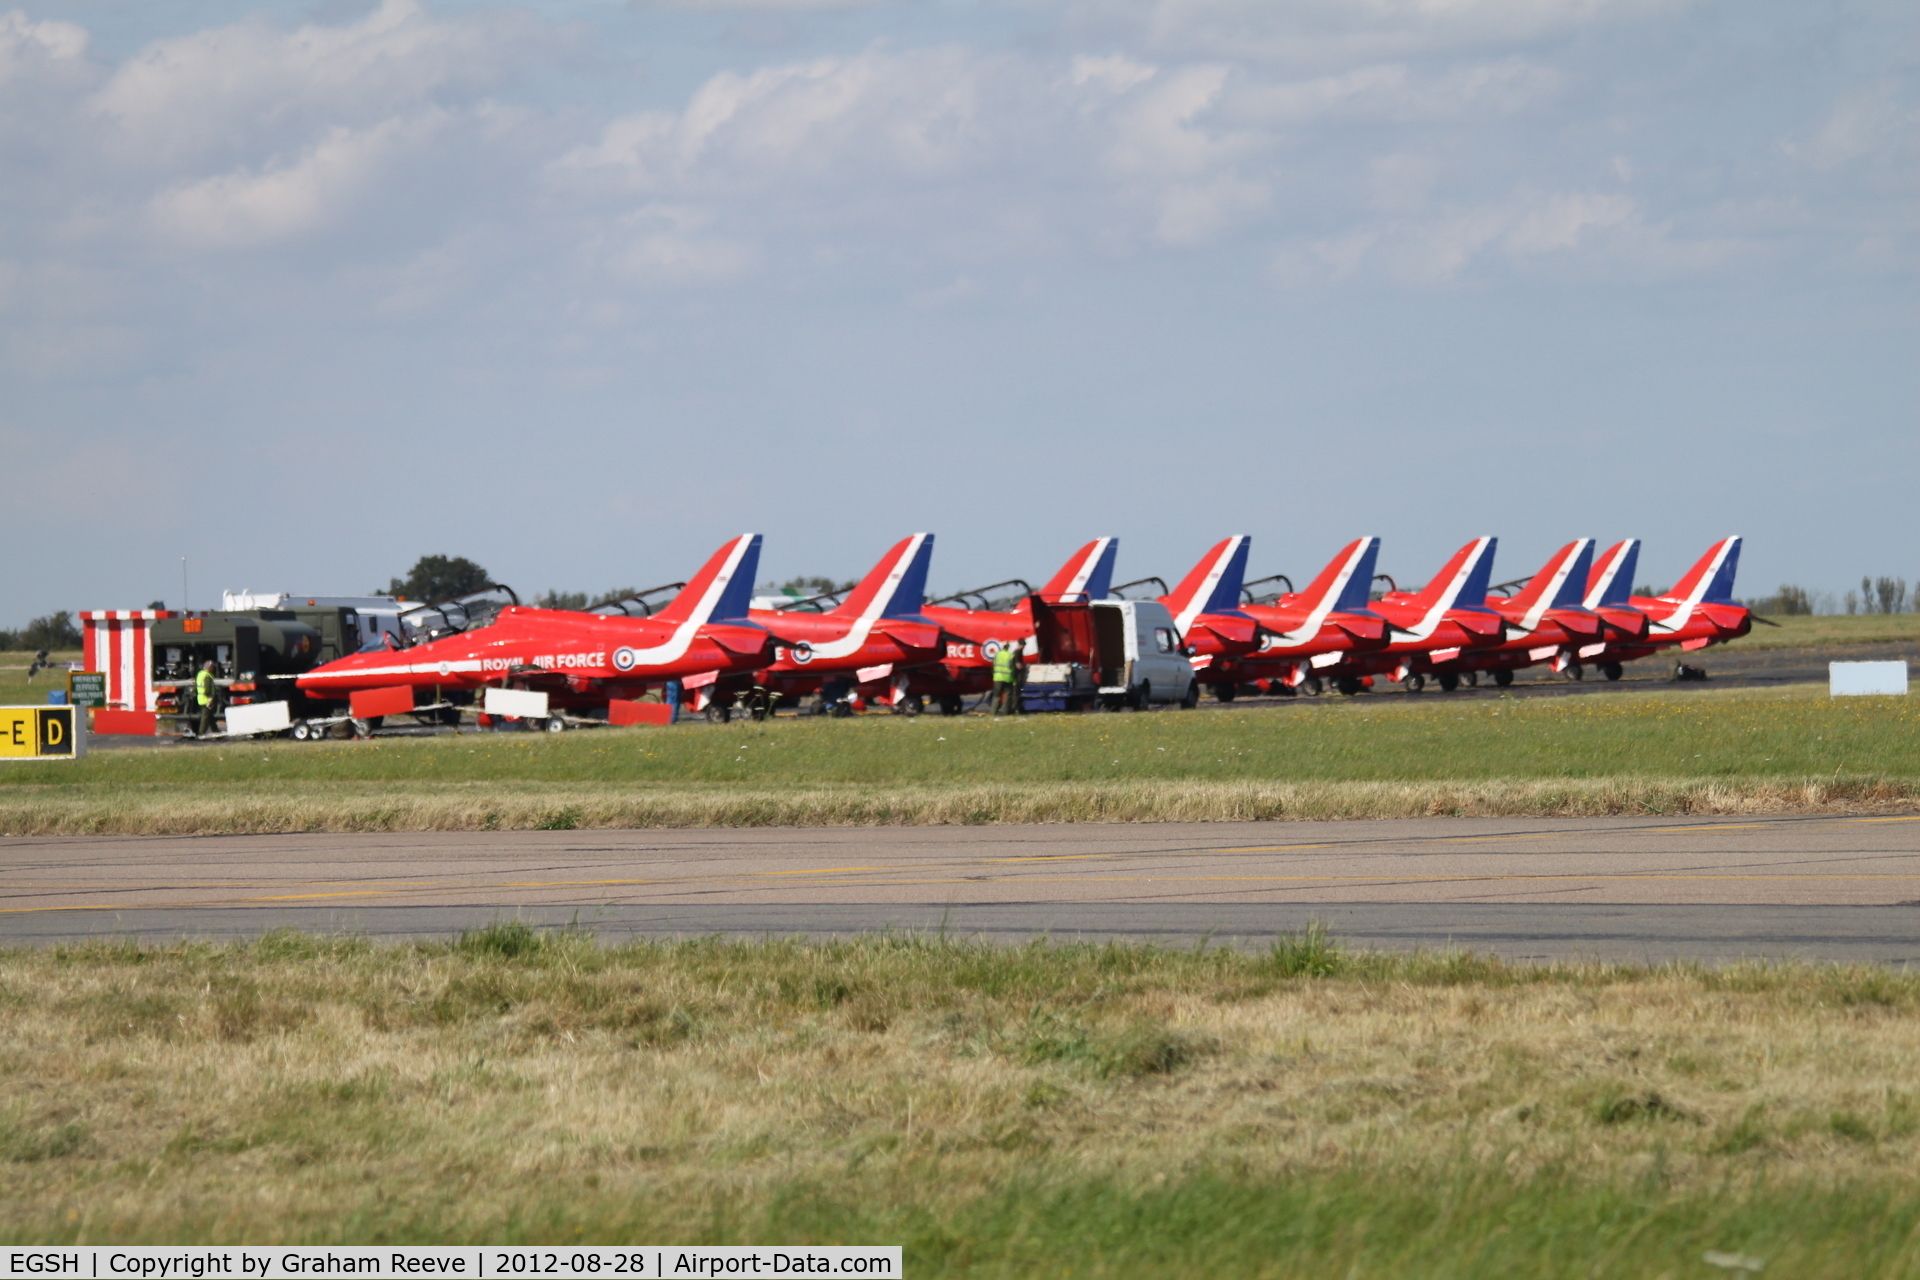 Norwich International Airport, Norwich, England United Kingdom (EGSH) - The Red Arrows parked on Delta at Norwich.